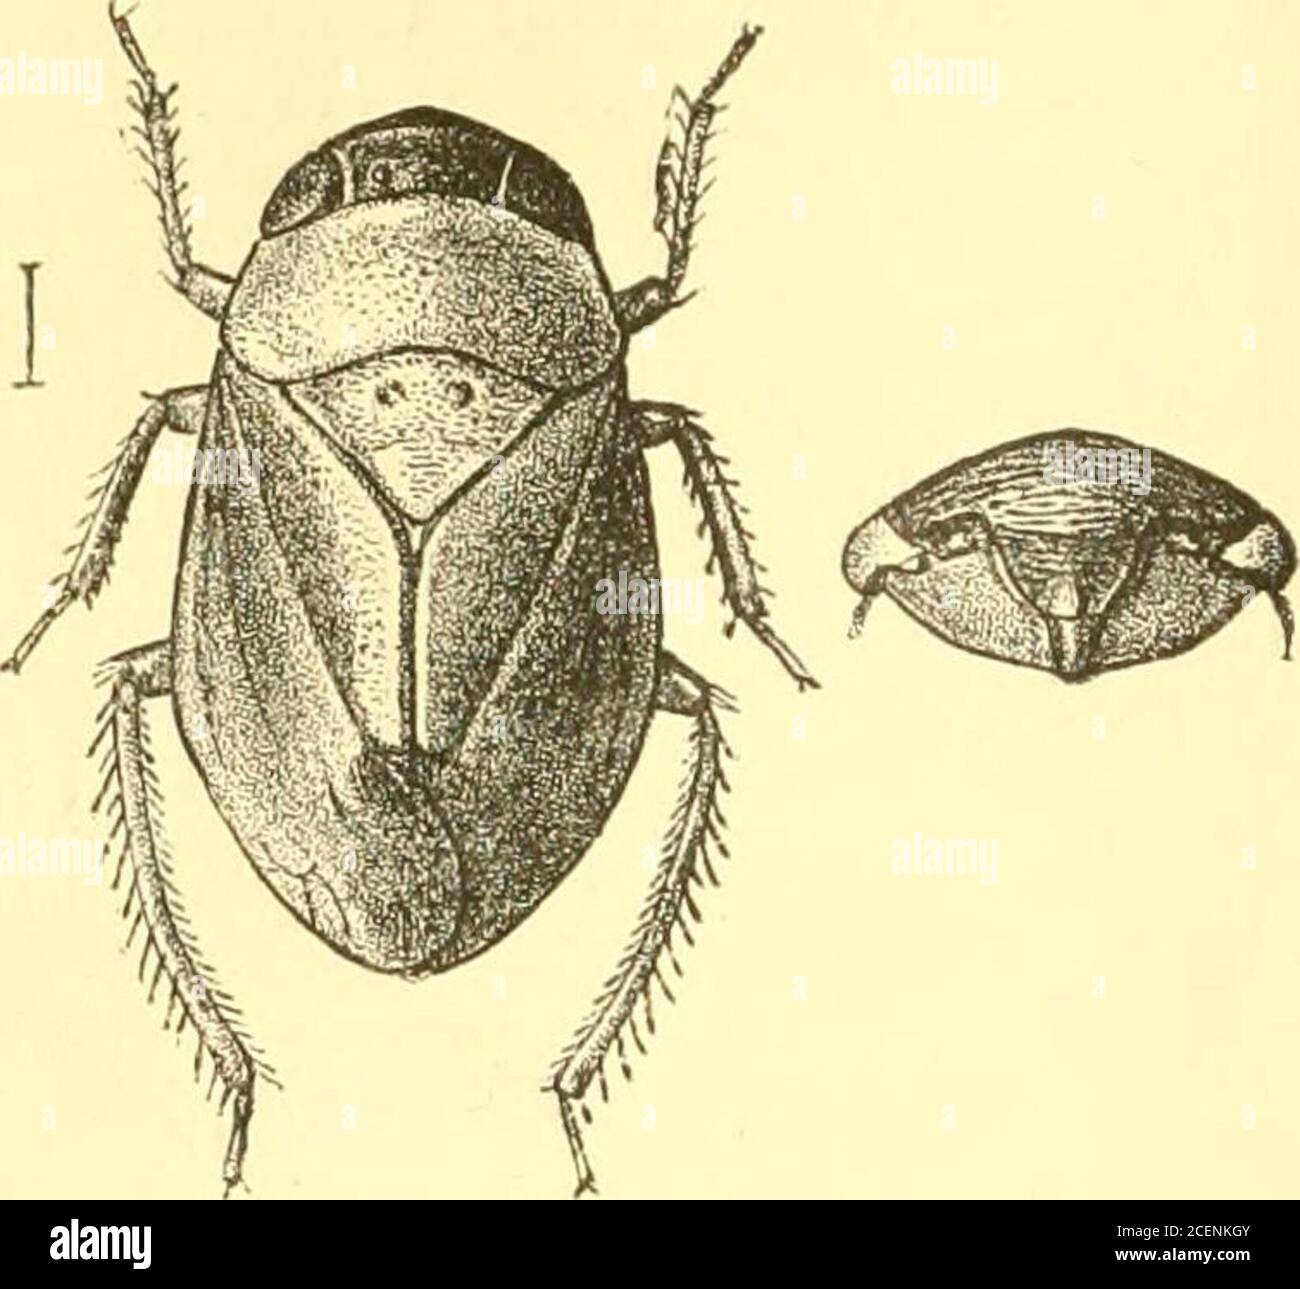 . Rhynchota ... gmina margined at theapex, valvate behind the clavus, apical areas four or five ; legsmoderate, femora compressed, posterior tibiae strongly spinose.{Stdl.) 2481. Penthimia melanocephala, Motsck. BuU. Soc. Nat. Mosc. xxxvi,3, p. 95 (1863) ; Melich. Horn. Fatm. Ceylon, p. 162 (1903). Head black; pronotum, scutellum and tegmina castaneous,inner claval margin black, apex of tegmen very pale fuscous withwhitish and black shadings; body beneath black, legs piceous orblack; vertex punctate; pronotum finely transversely wrinkled;scutellum punctate, the basal area somewhat obliquely de Stock Photo